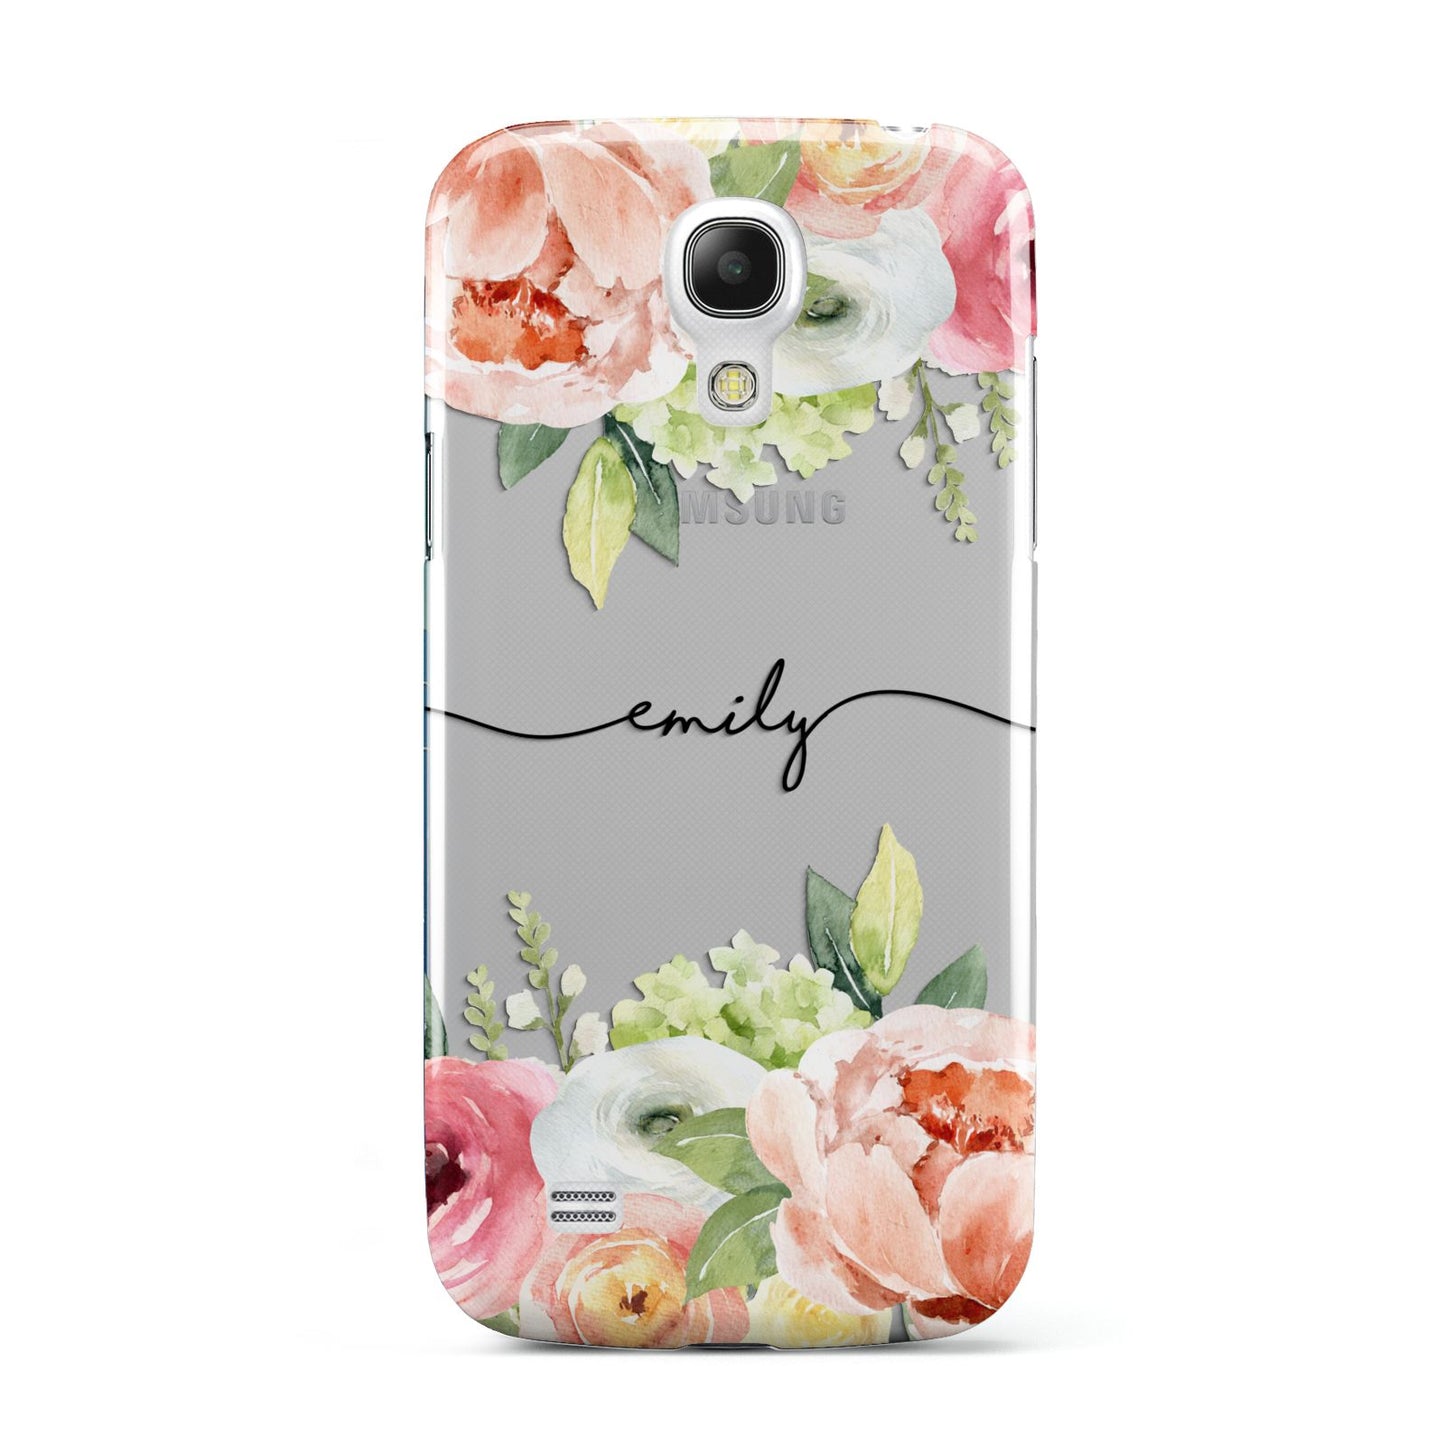 Personalised Flowers Samsung Galaxy S4 Mini Case